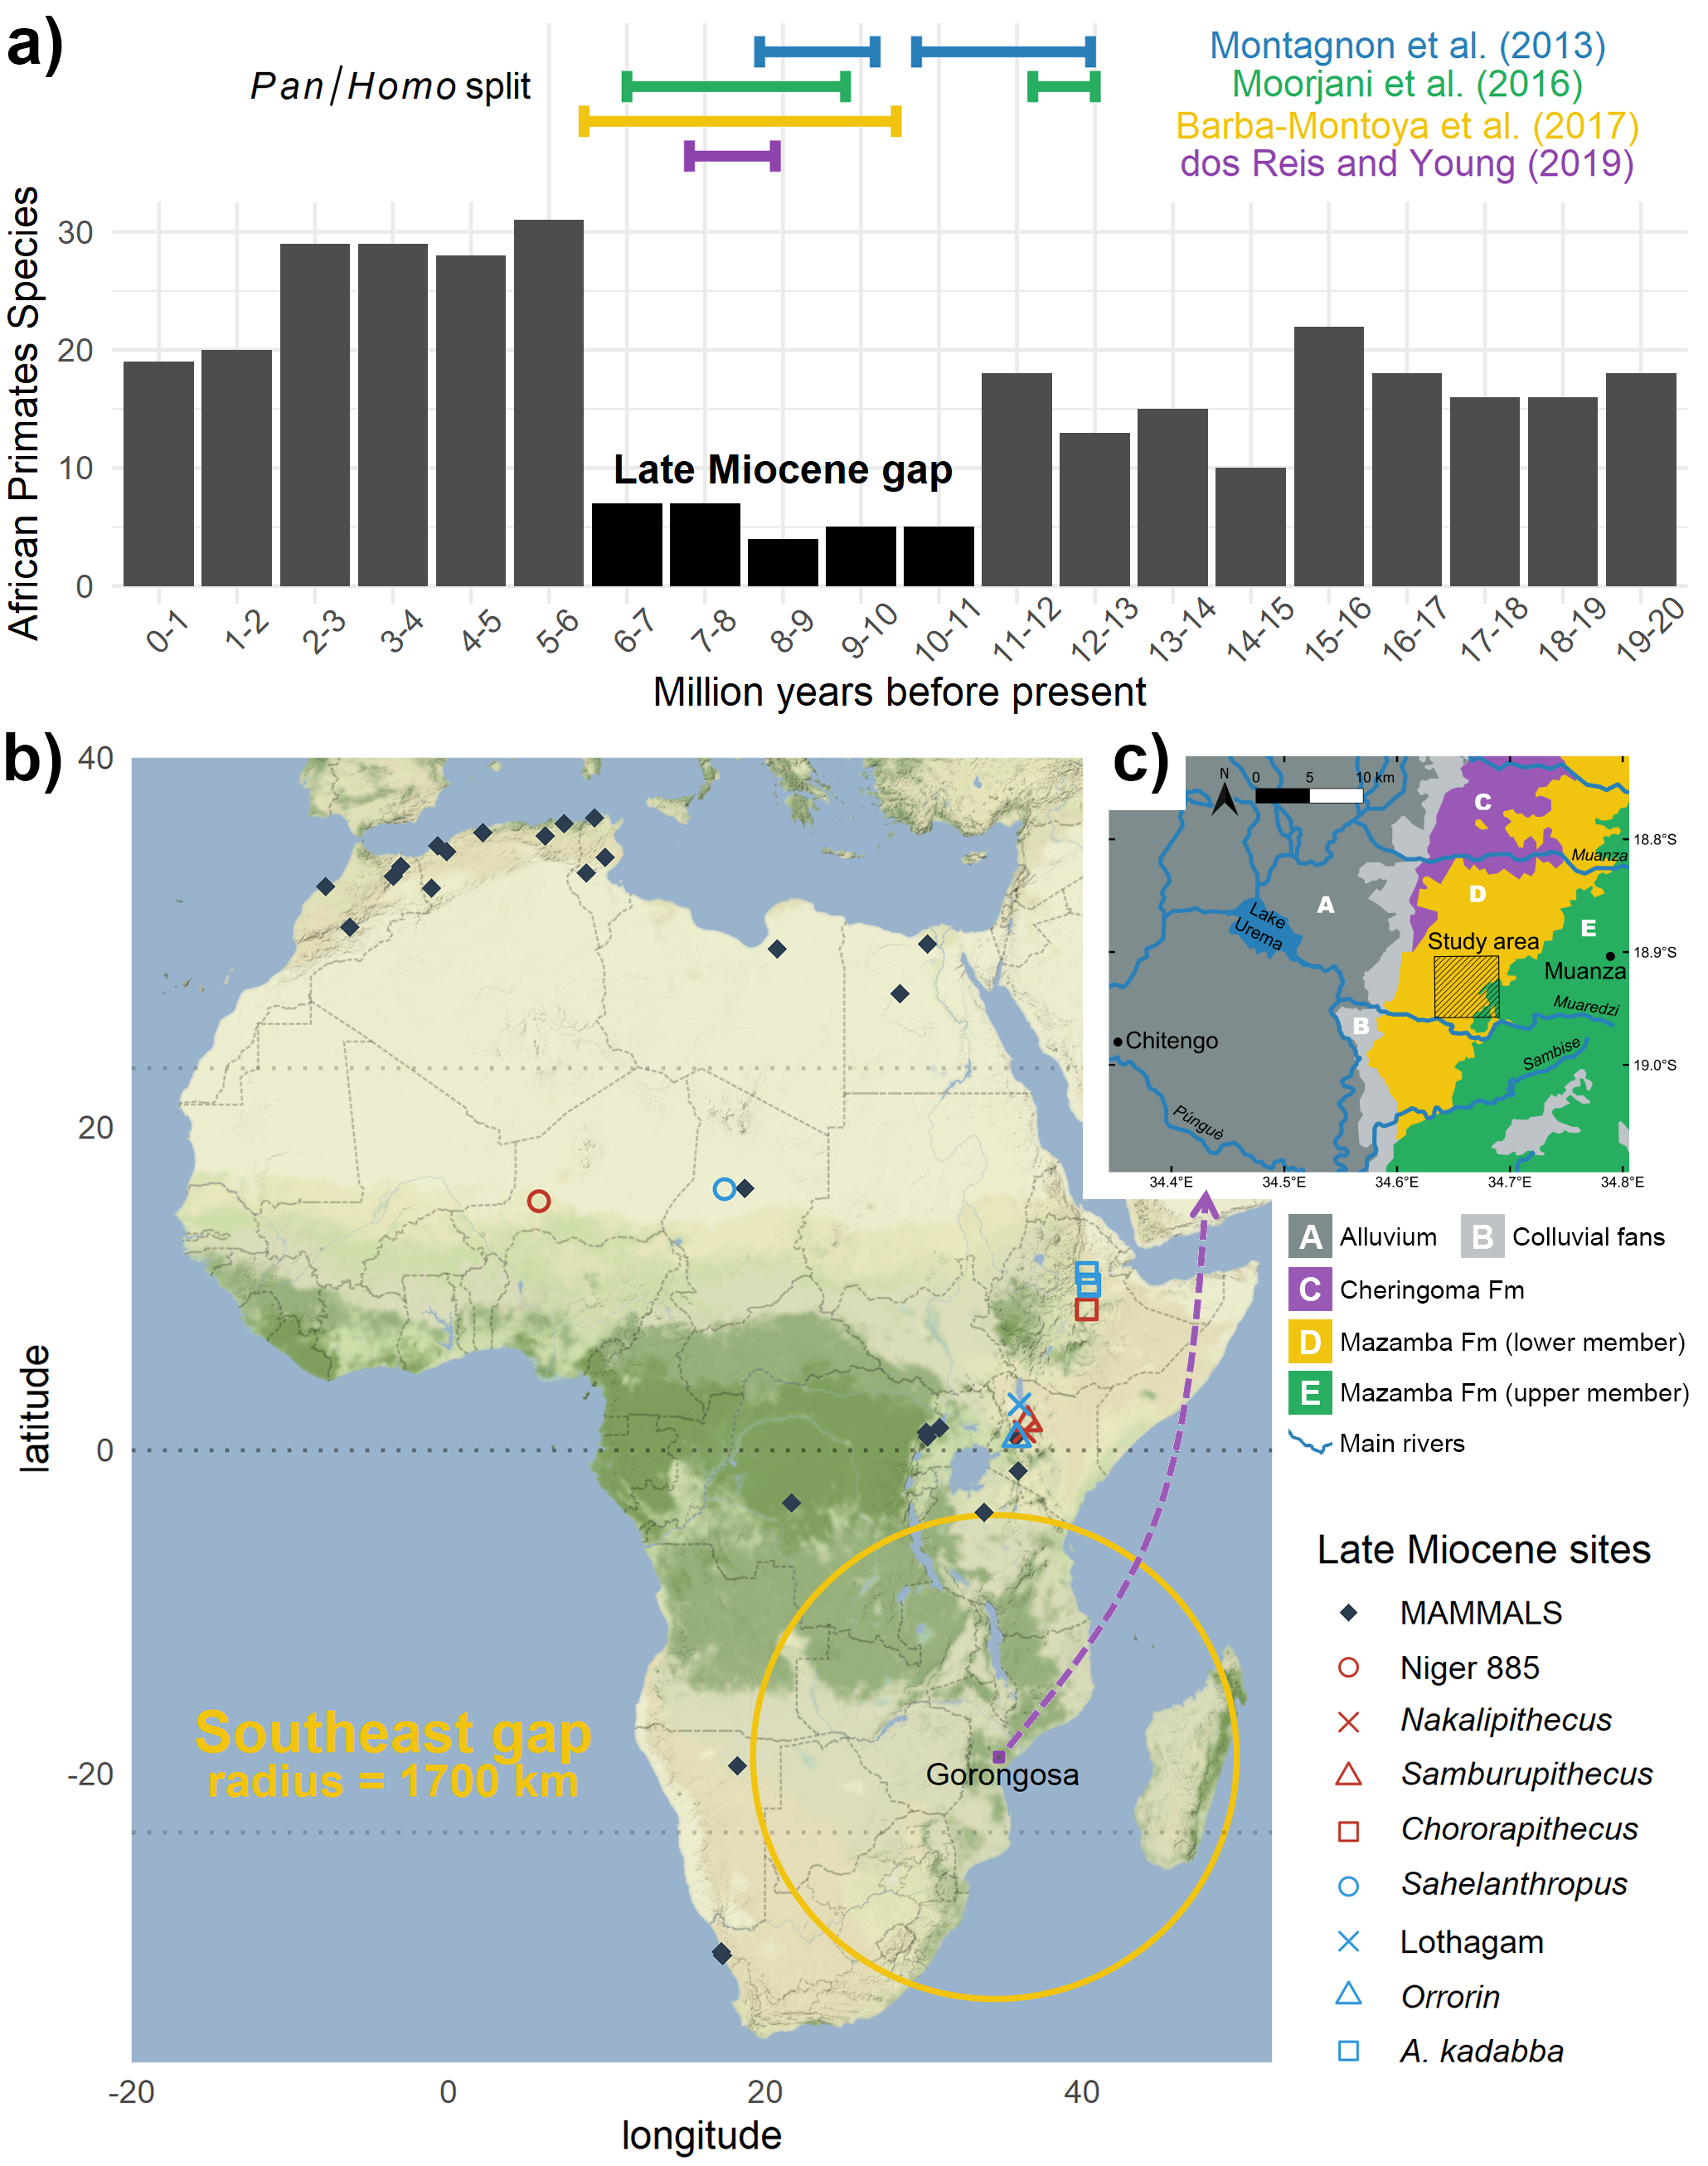 (A) Time gap: during this key period the African fossil record of primates is very incomplete (evaluated through species richness); but notice the split estimates from genomics; (B) spatial gap: virtually no fossils of this age are known in southeastern Africa, notice the strategic location of Gorongosa. Data extracted from paleobiodb.org, map adapted from Bobe et al. (2018); (C) study area for k-means within the geological context of Gorongosa, adapted from Habermann et al. (2019).